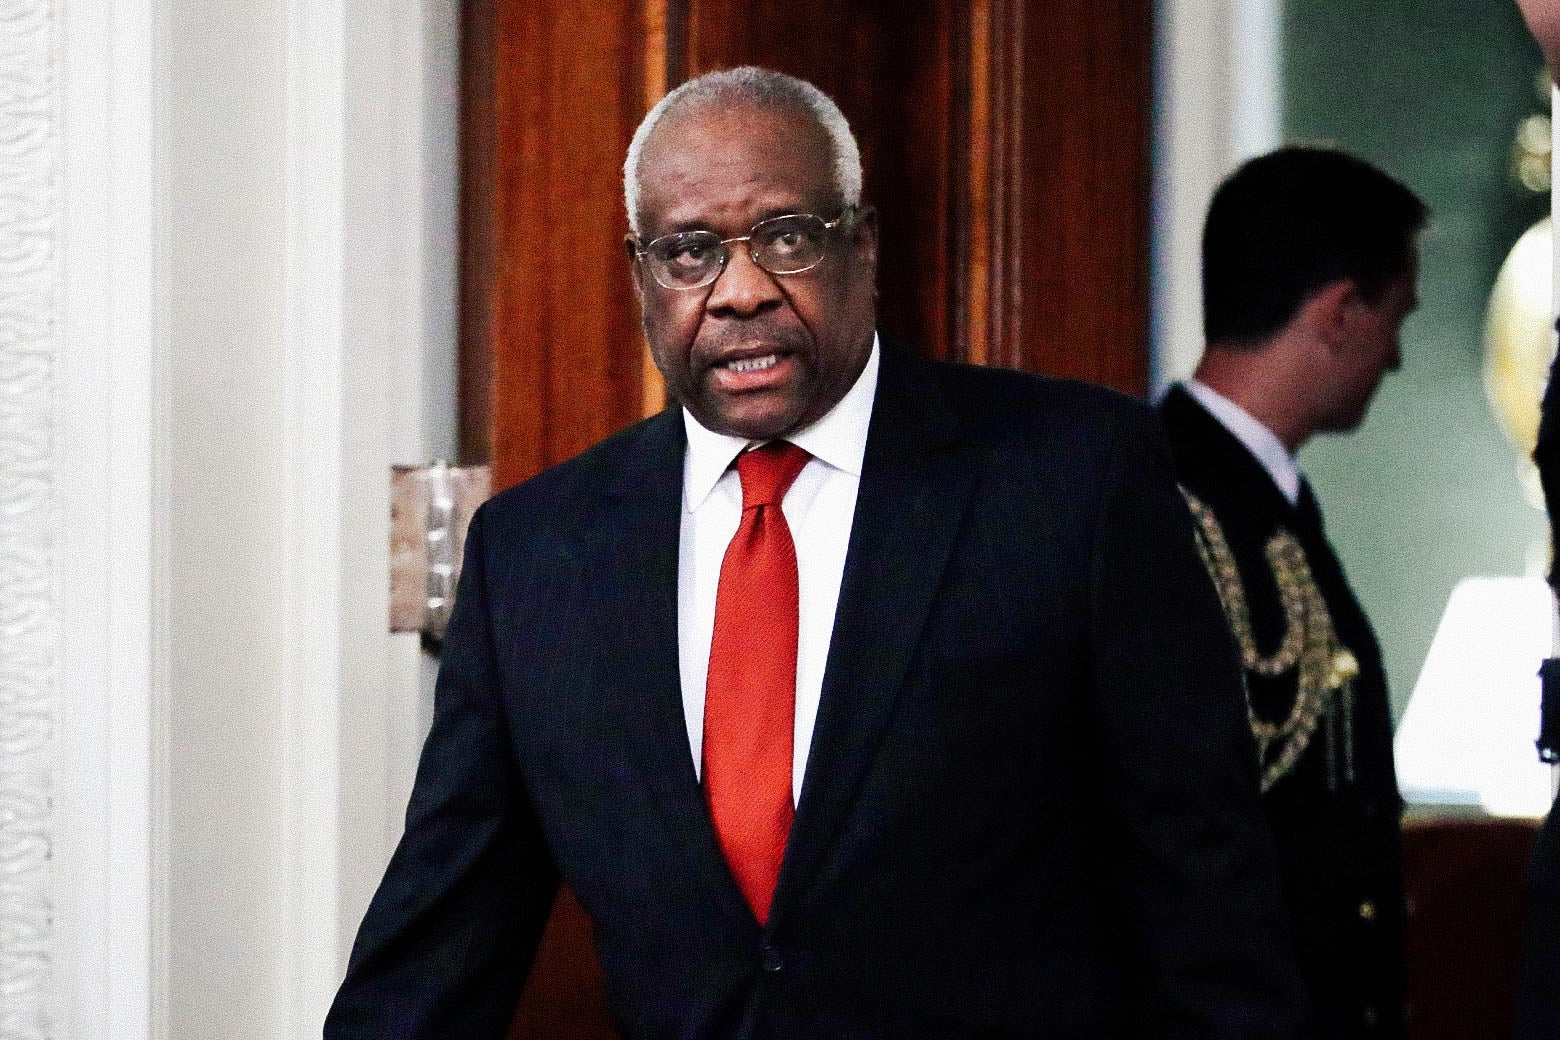 Clarence Thomas in a suit.